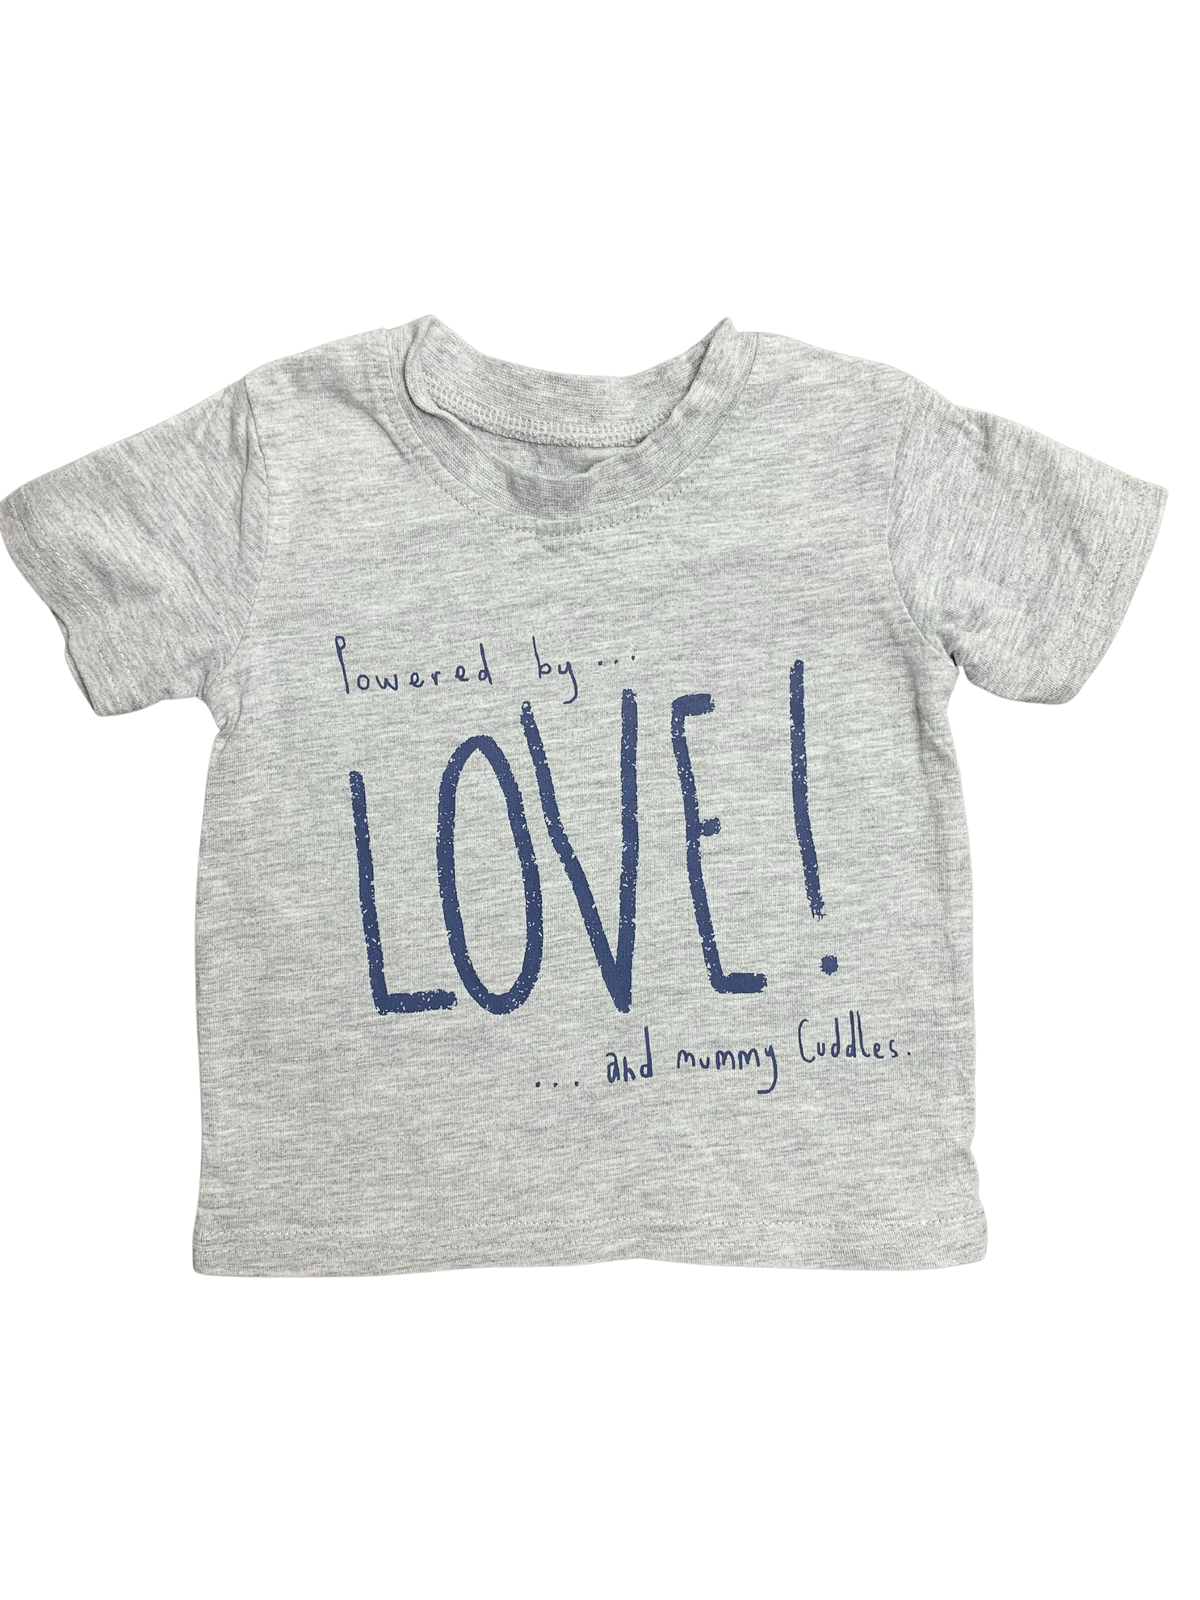 George 'Powered By Love' T Shirt 3-6 Months/18lbs